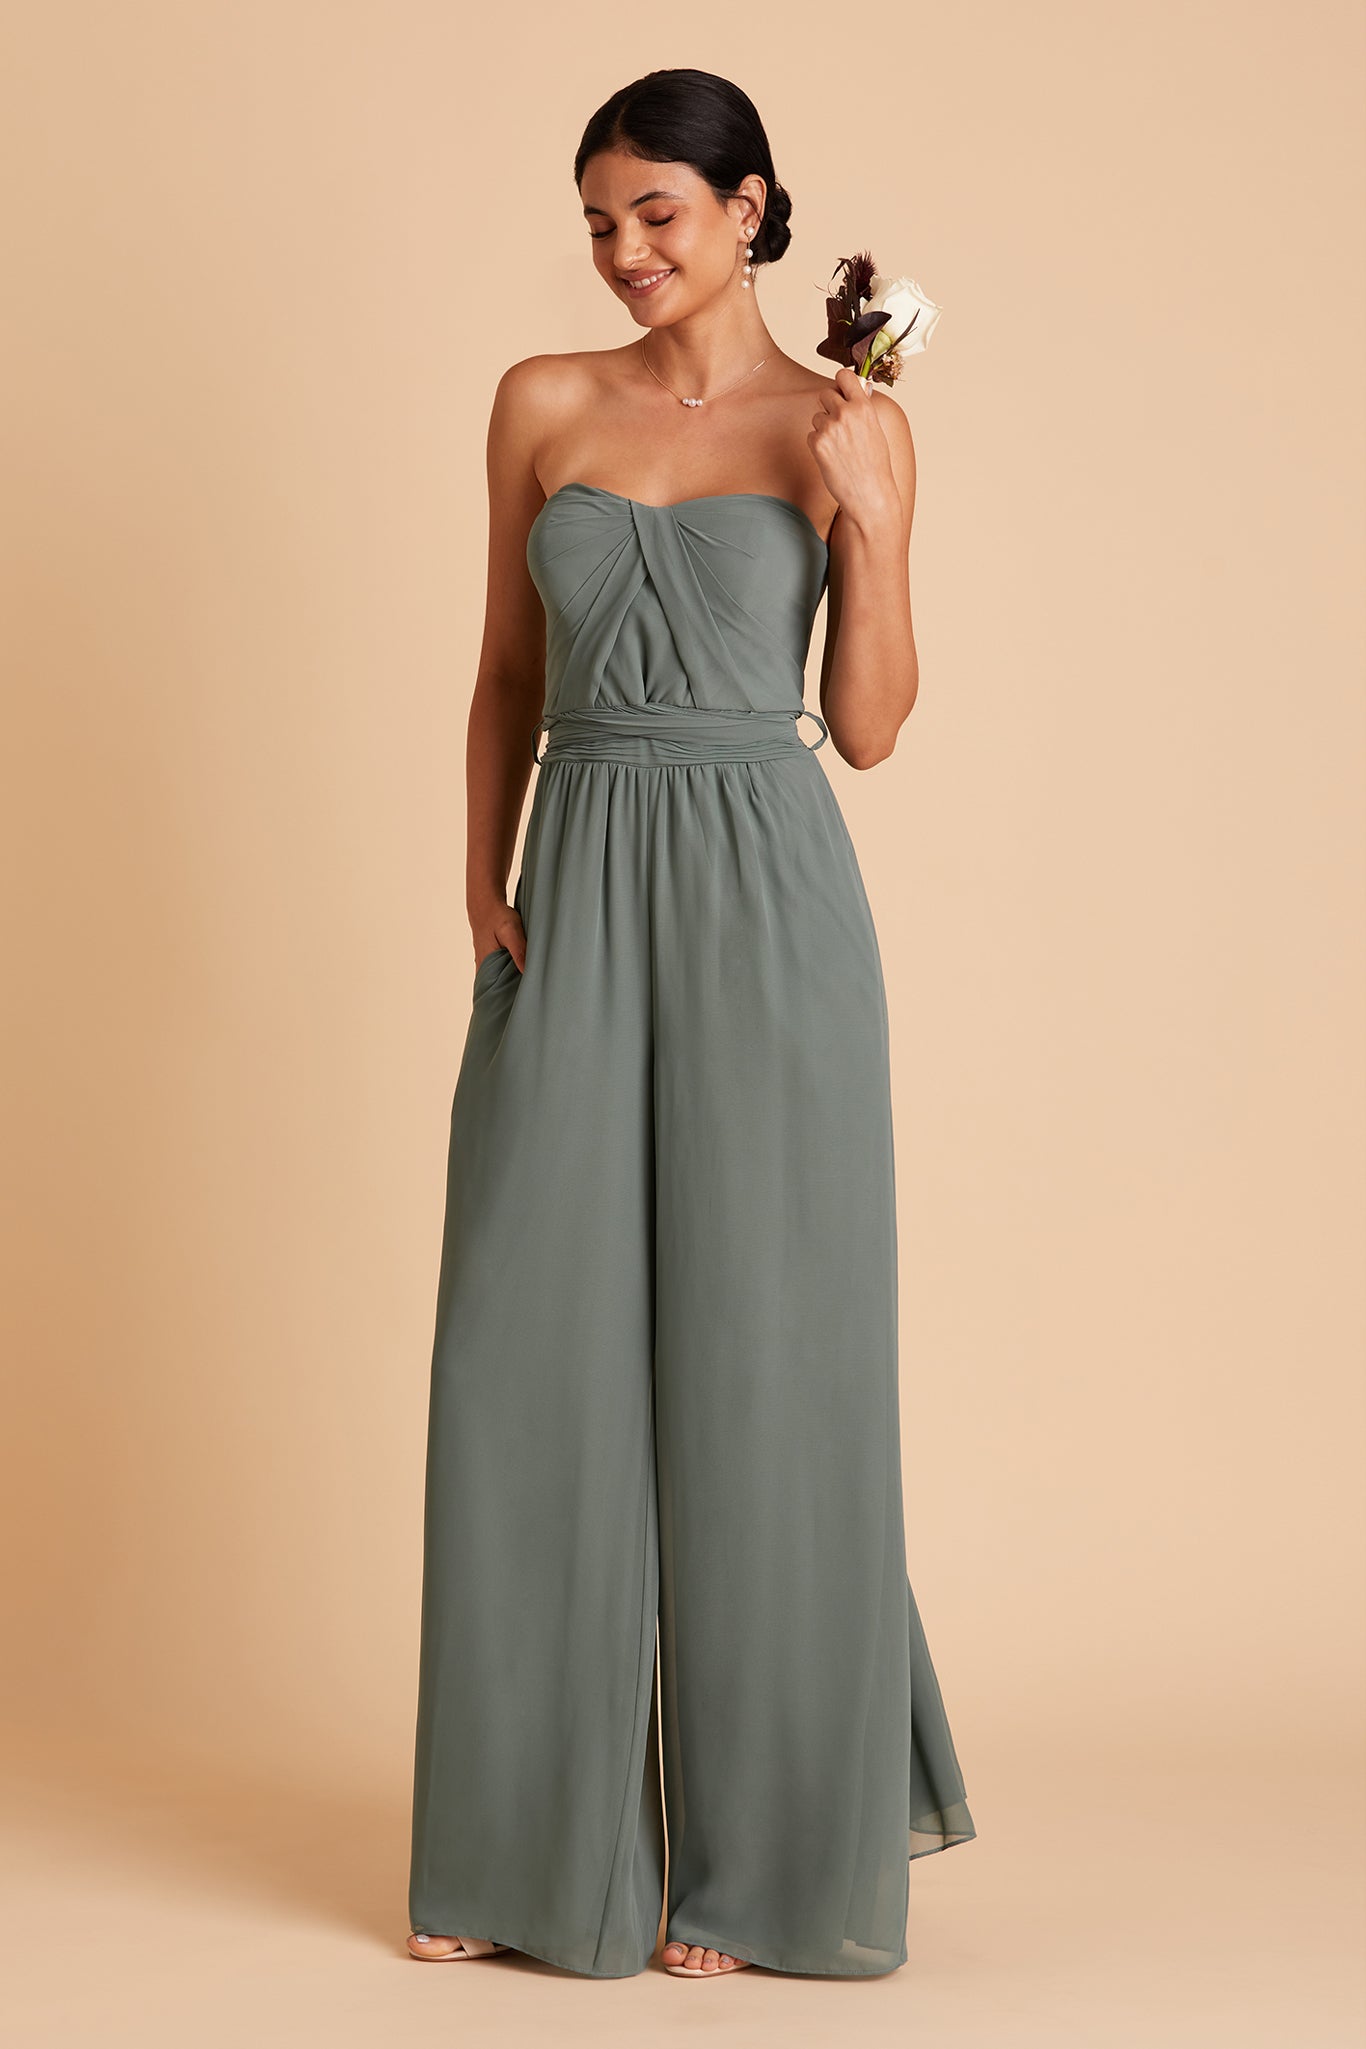 Gigi convertible jumpsuit in sea glass chiffon by Birdy Grey, front view